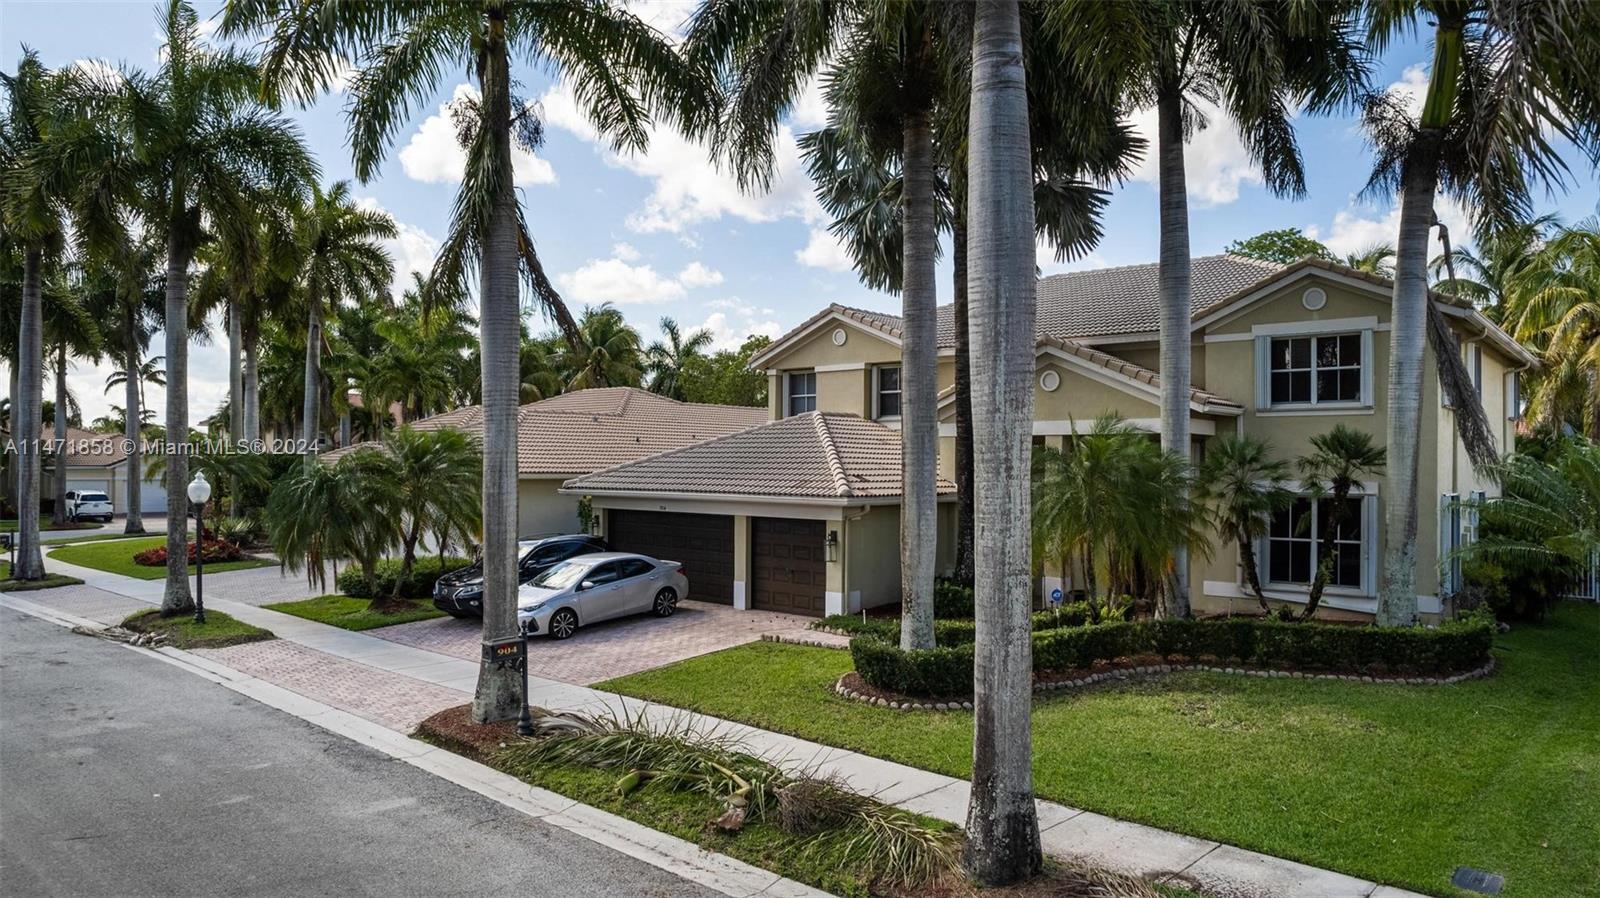 904 Stillwater Ct, Weston, Florida 33327, 5 Bedrooms Bedrooms, ,4 BathroomsBathrooms,Residential,For Sale,904 Stillwater Ct,A11471858